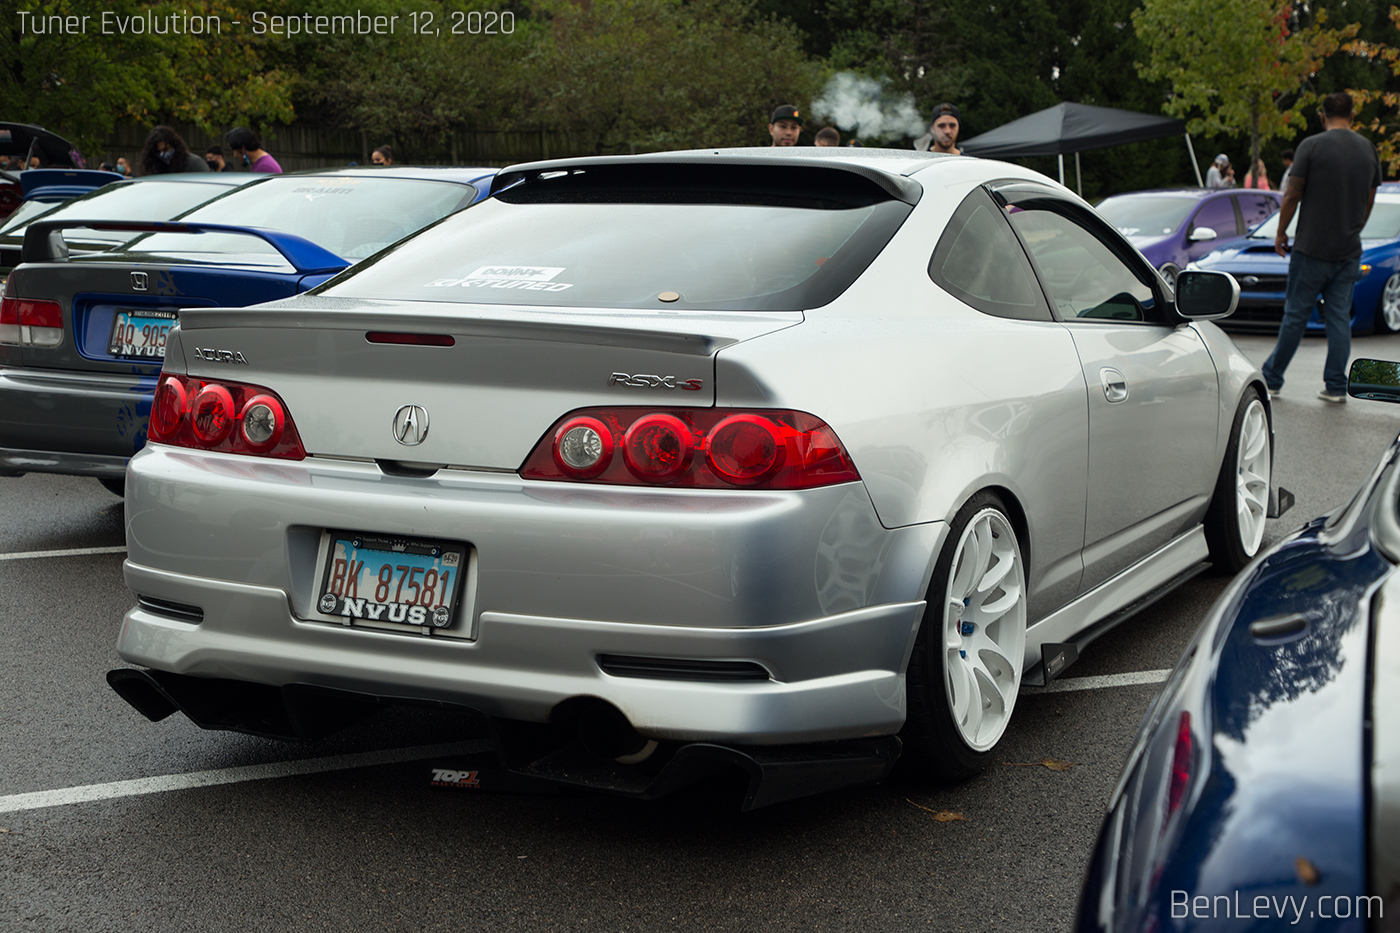 Silver Acura Type-S